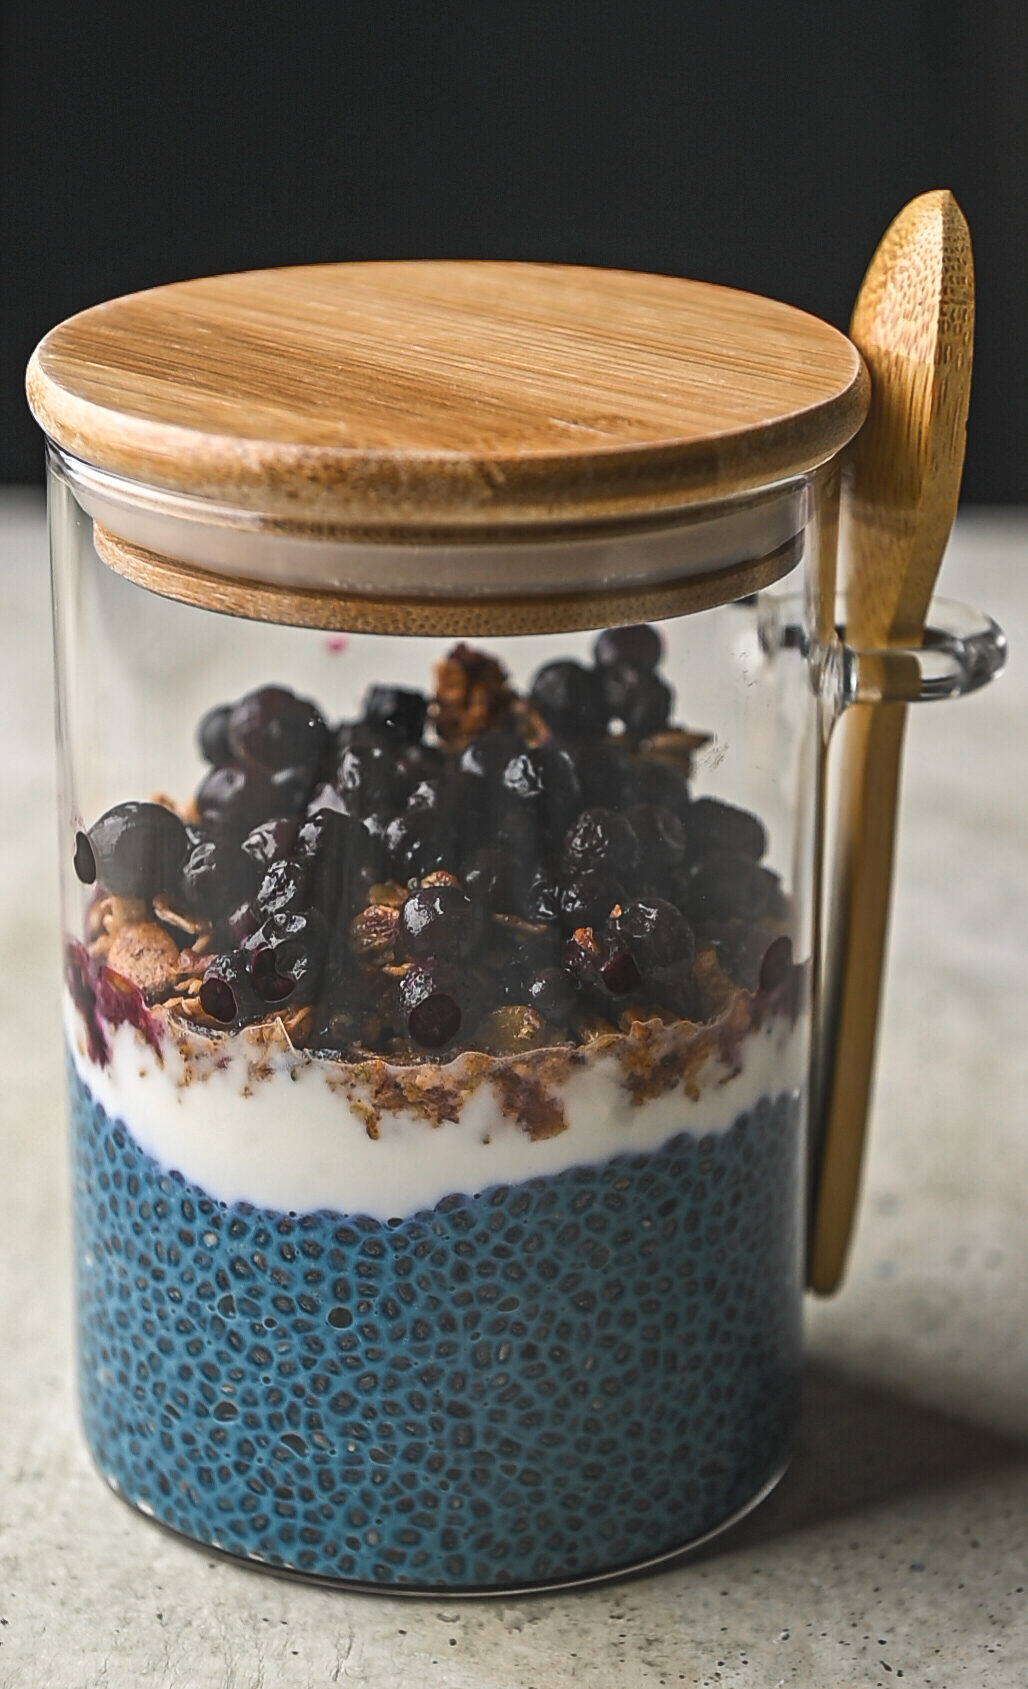 Glass jar with wooden lid and spoon, inside contains overnight blue chia pudding, granola and blueberries ready to go by teri-ann carty